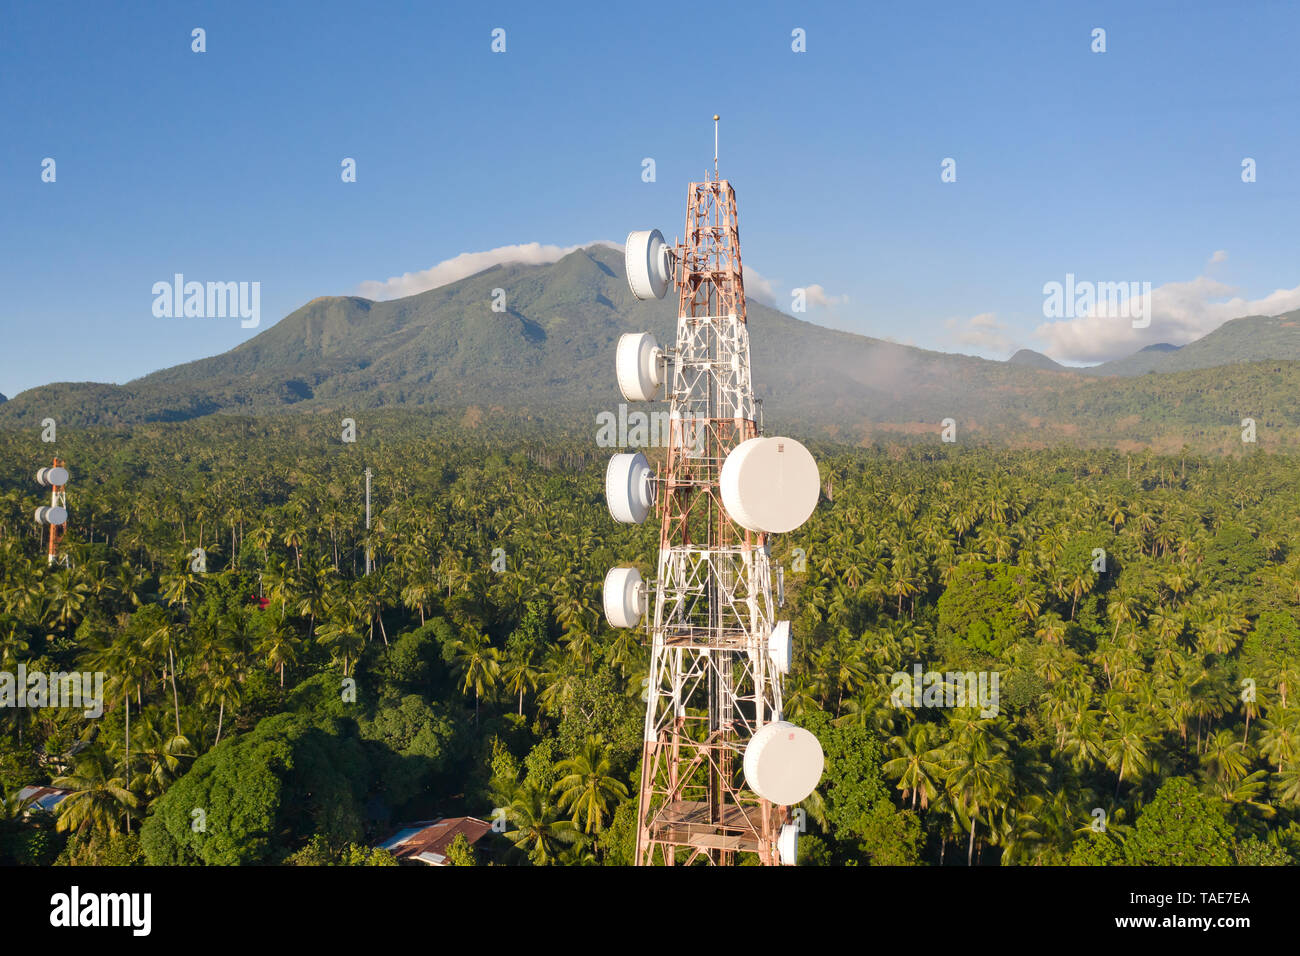 Telecommunication tower, communication antenna on Camiguin Island, Philippines. Repeaters on a metal tower. Landscape with hills and rainforest, view  Stock Photo